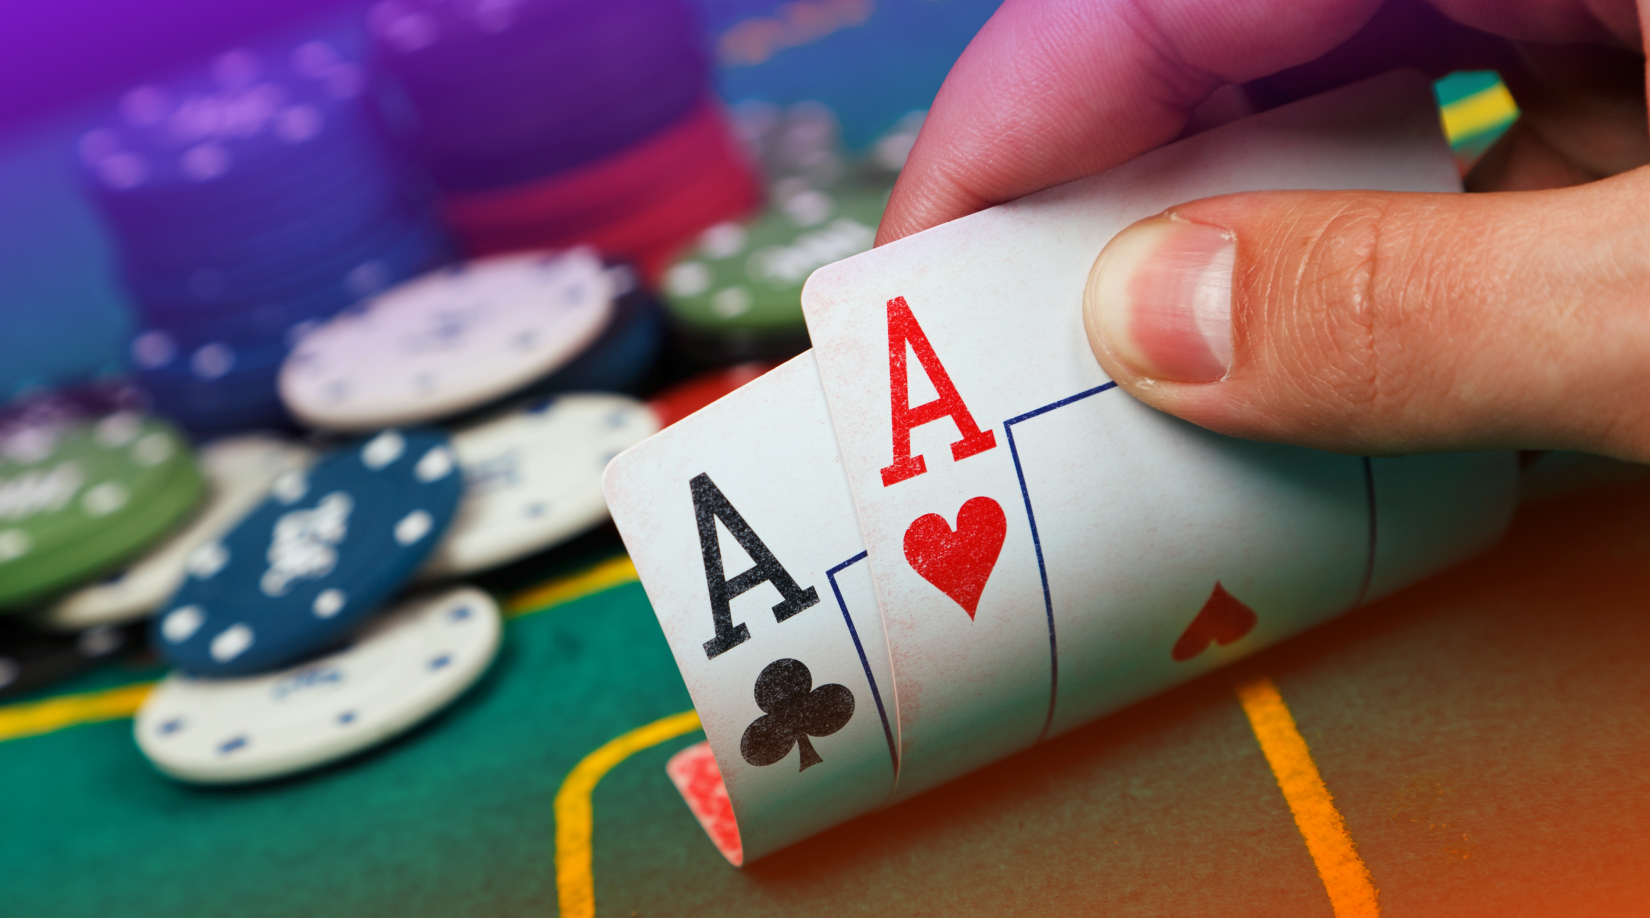 Baccarat vs blackjack: which game offers better odds?